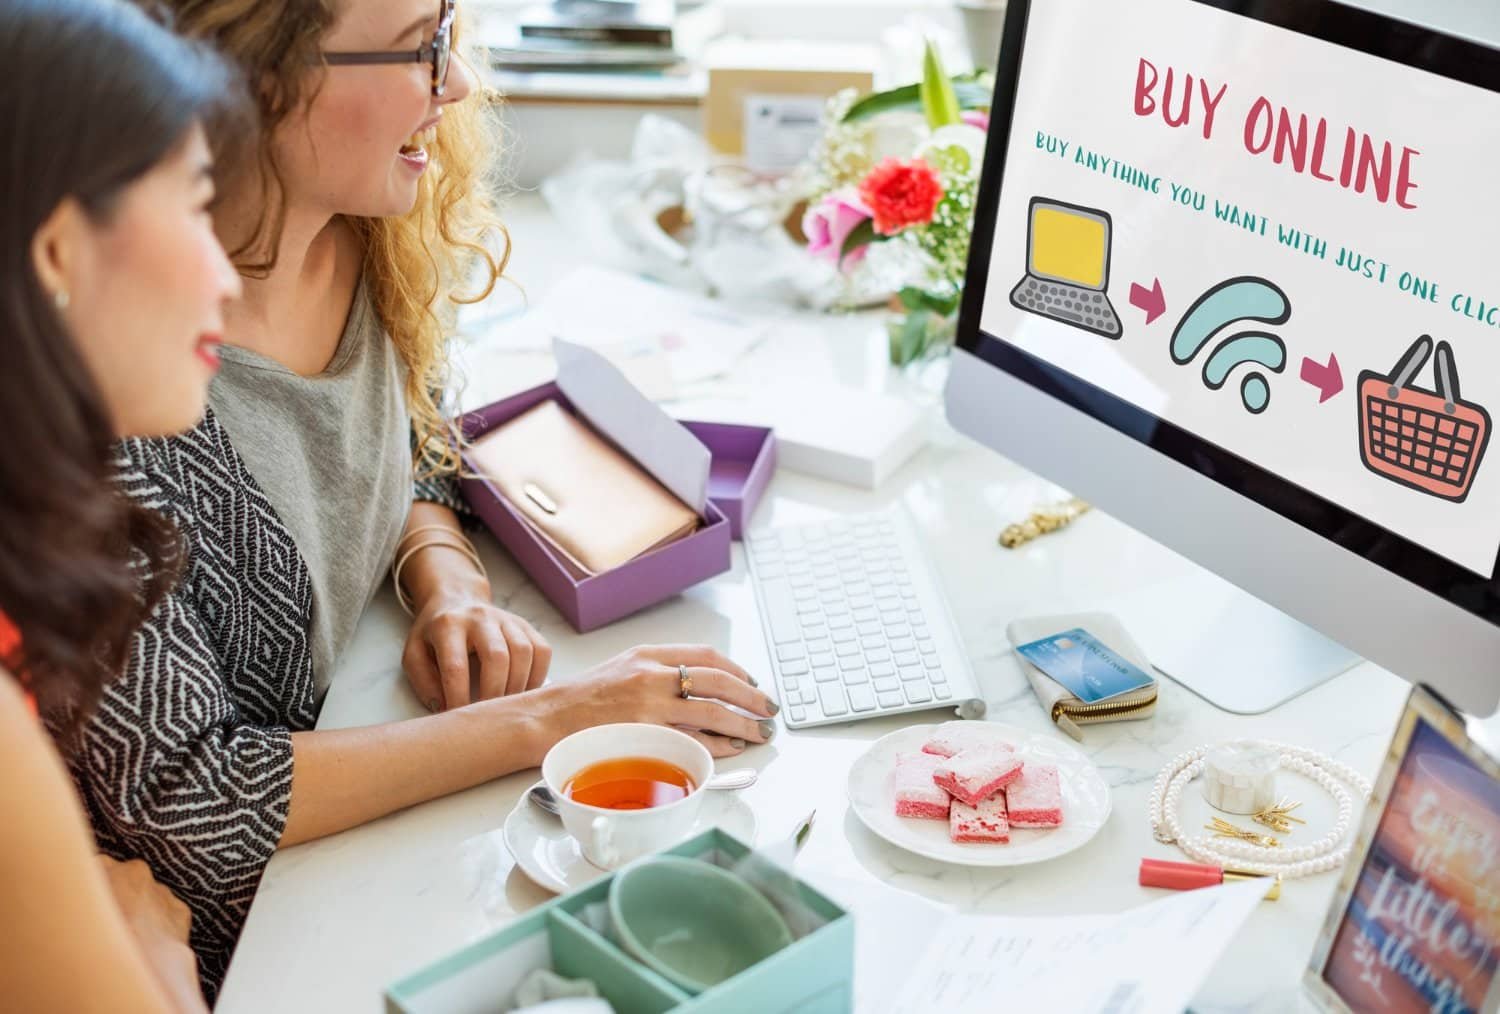 Tips for Finding the Best Online Deals and Discounts